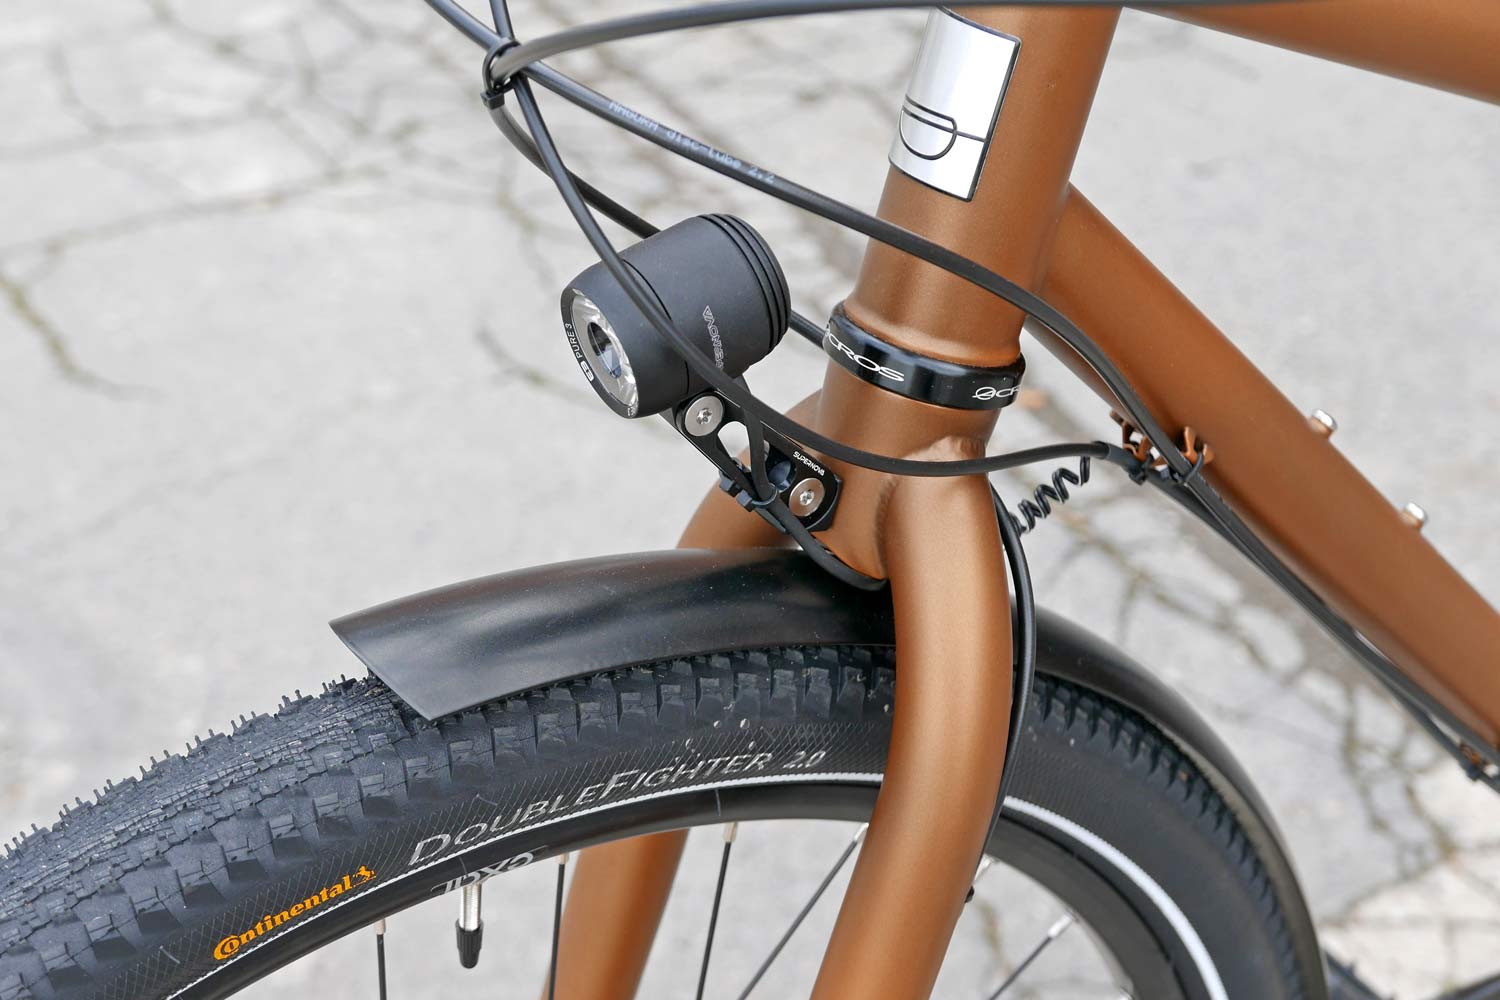 Sour Bicycles solid, affordable production steel off-road bikes Pick Up truck